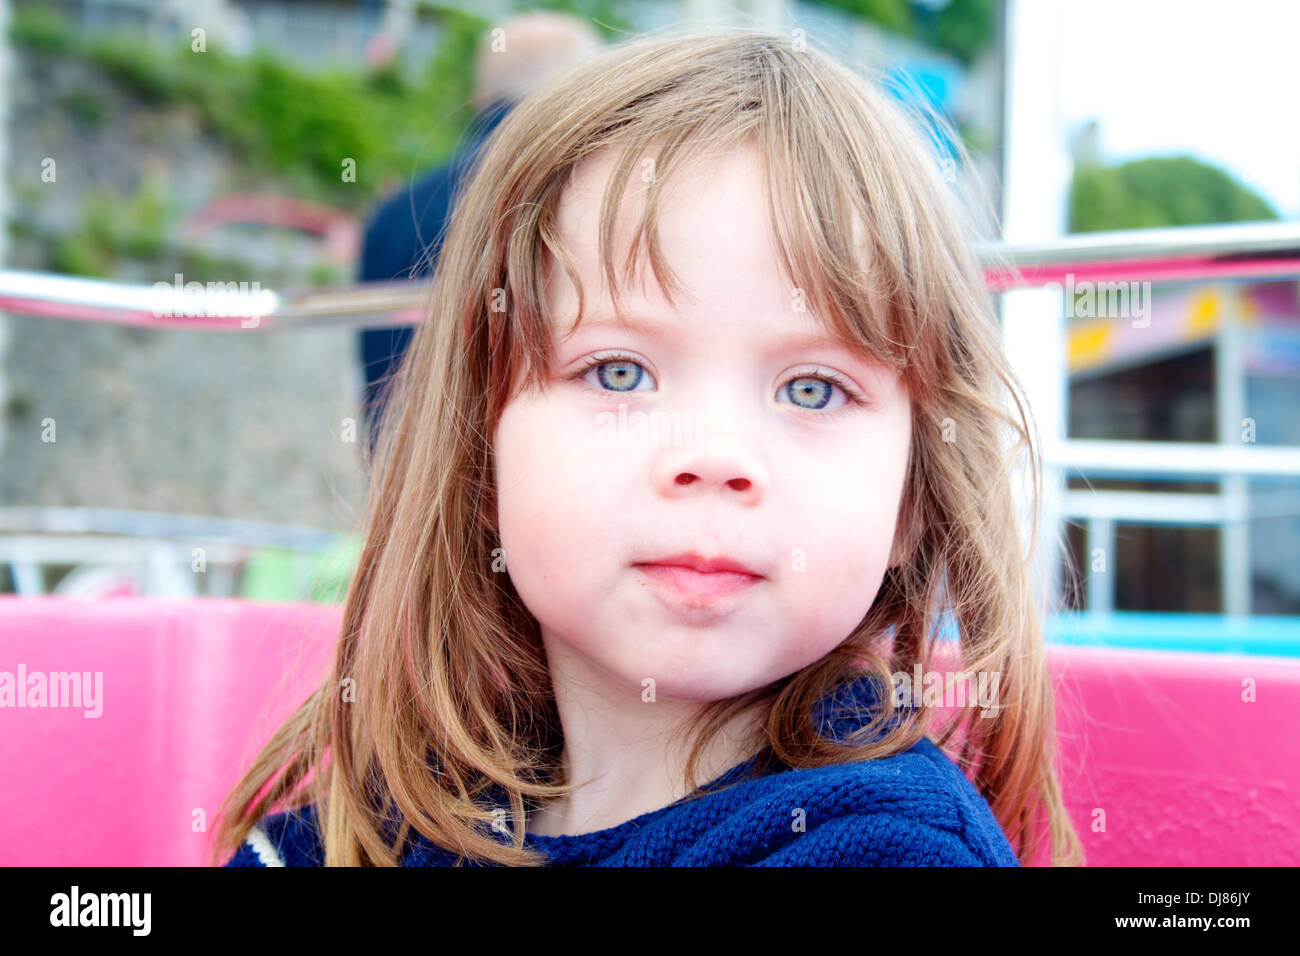 A young girl on a fairground ride Stock Photo